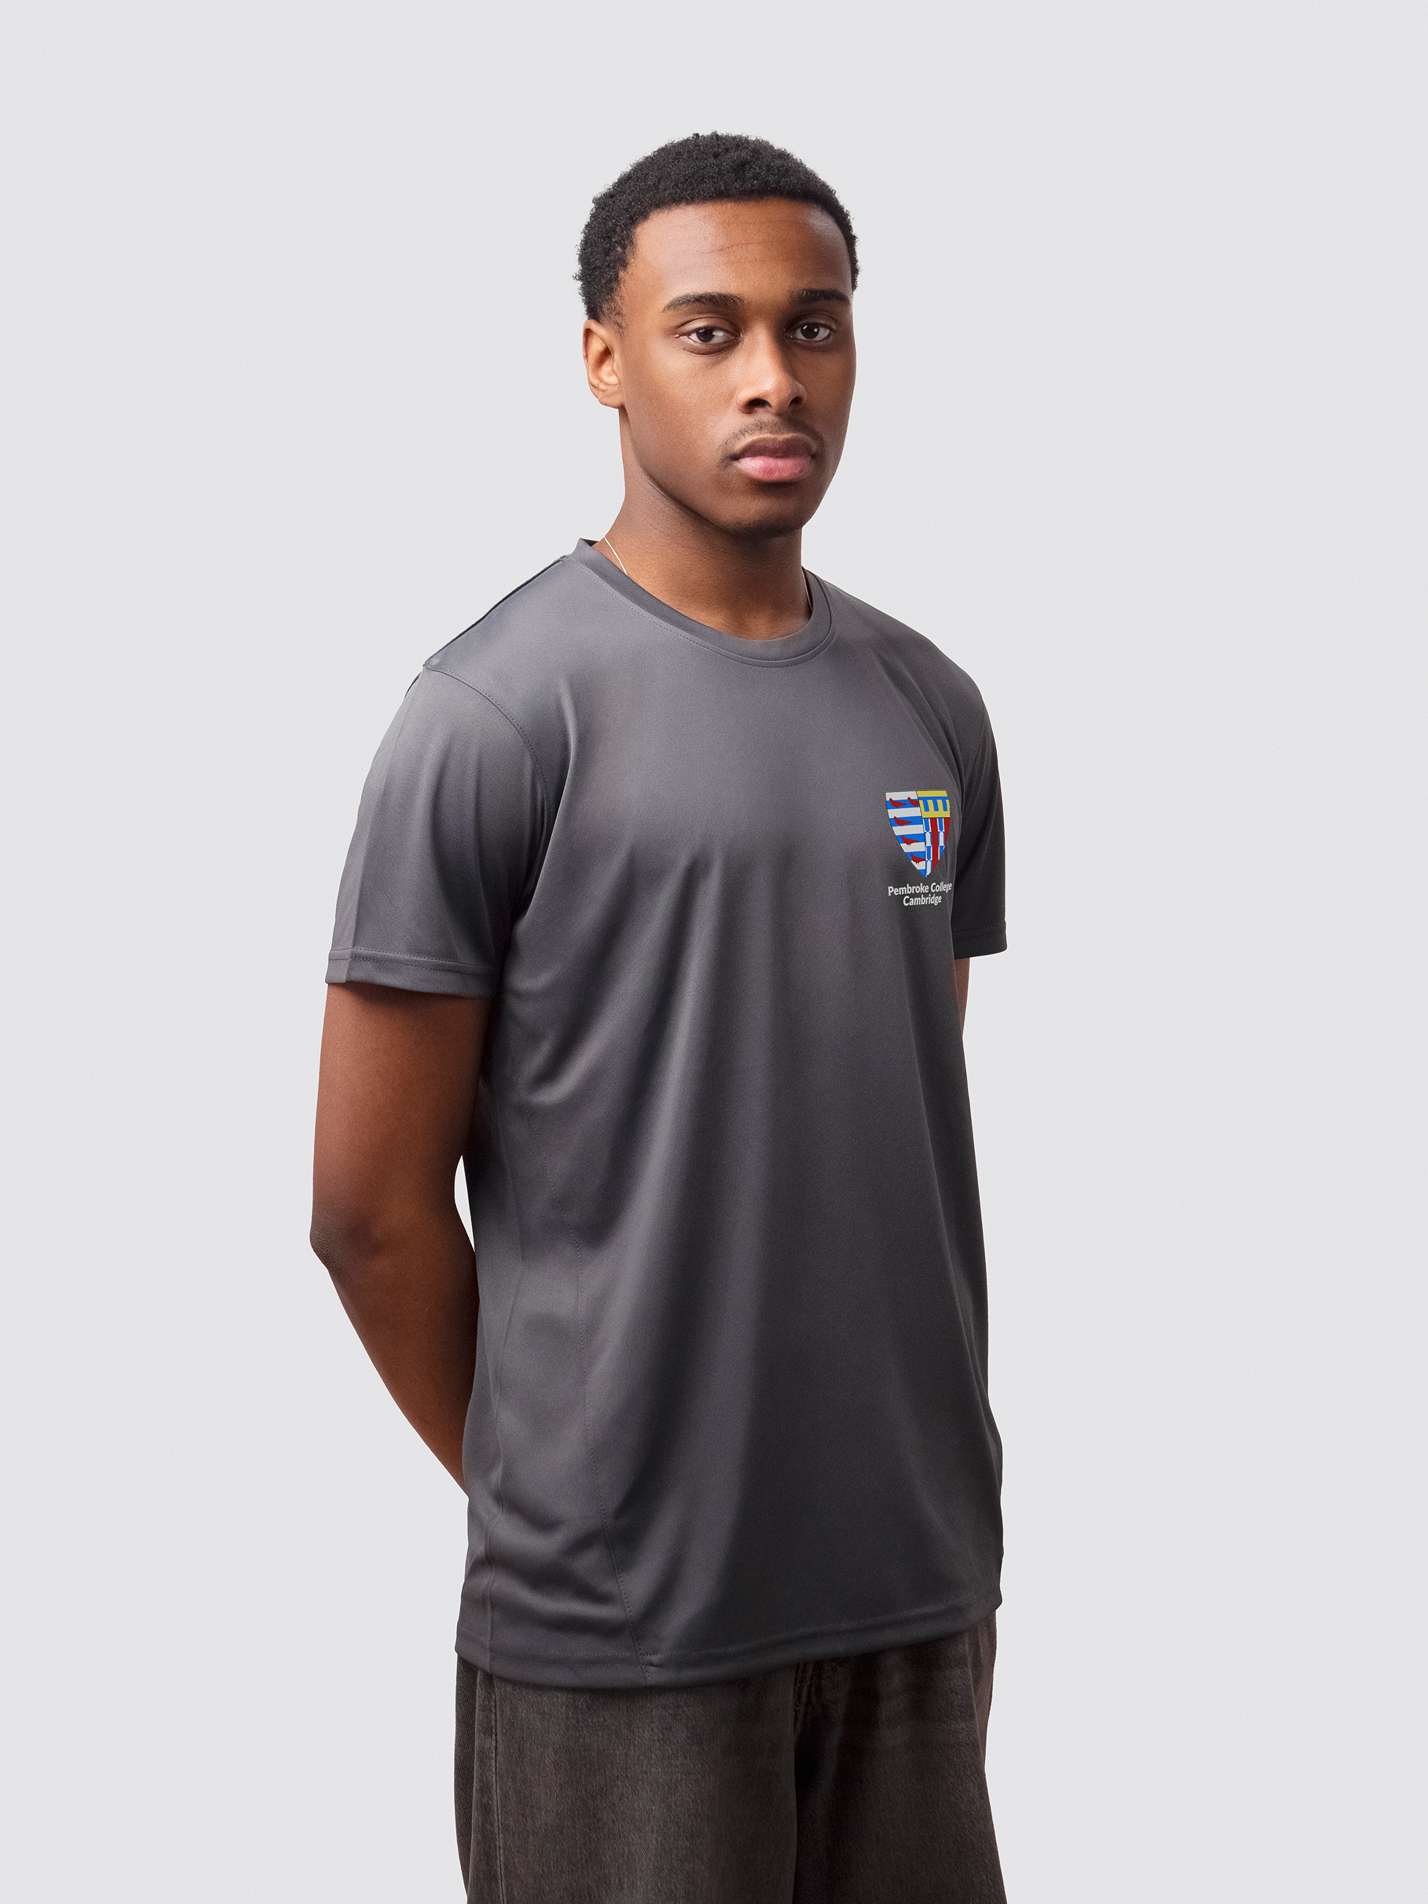 High-performance, crested university t-shirt, with quick-drying fabric